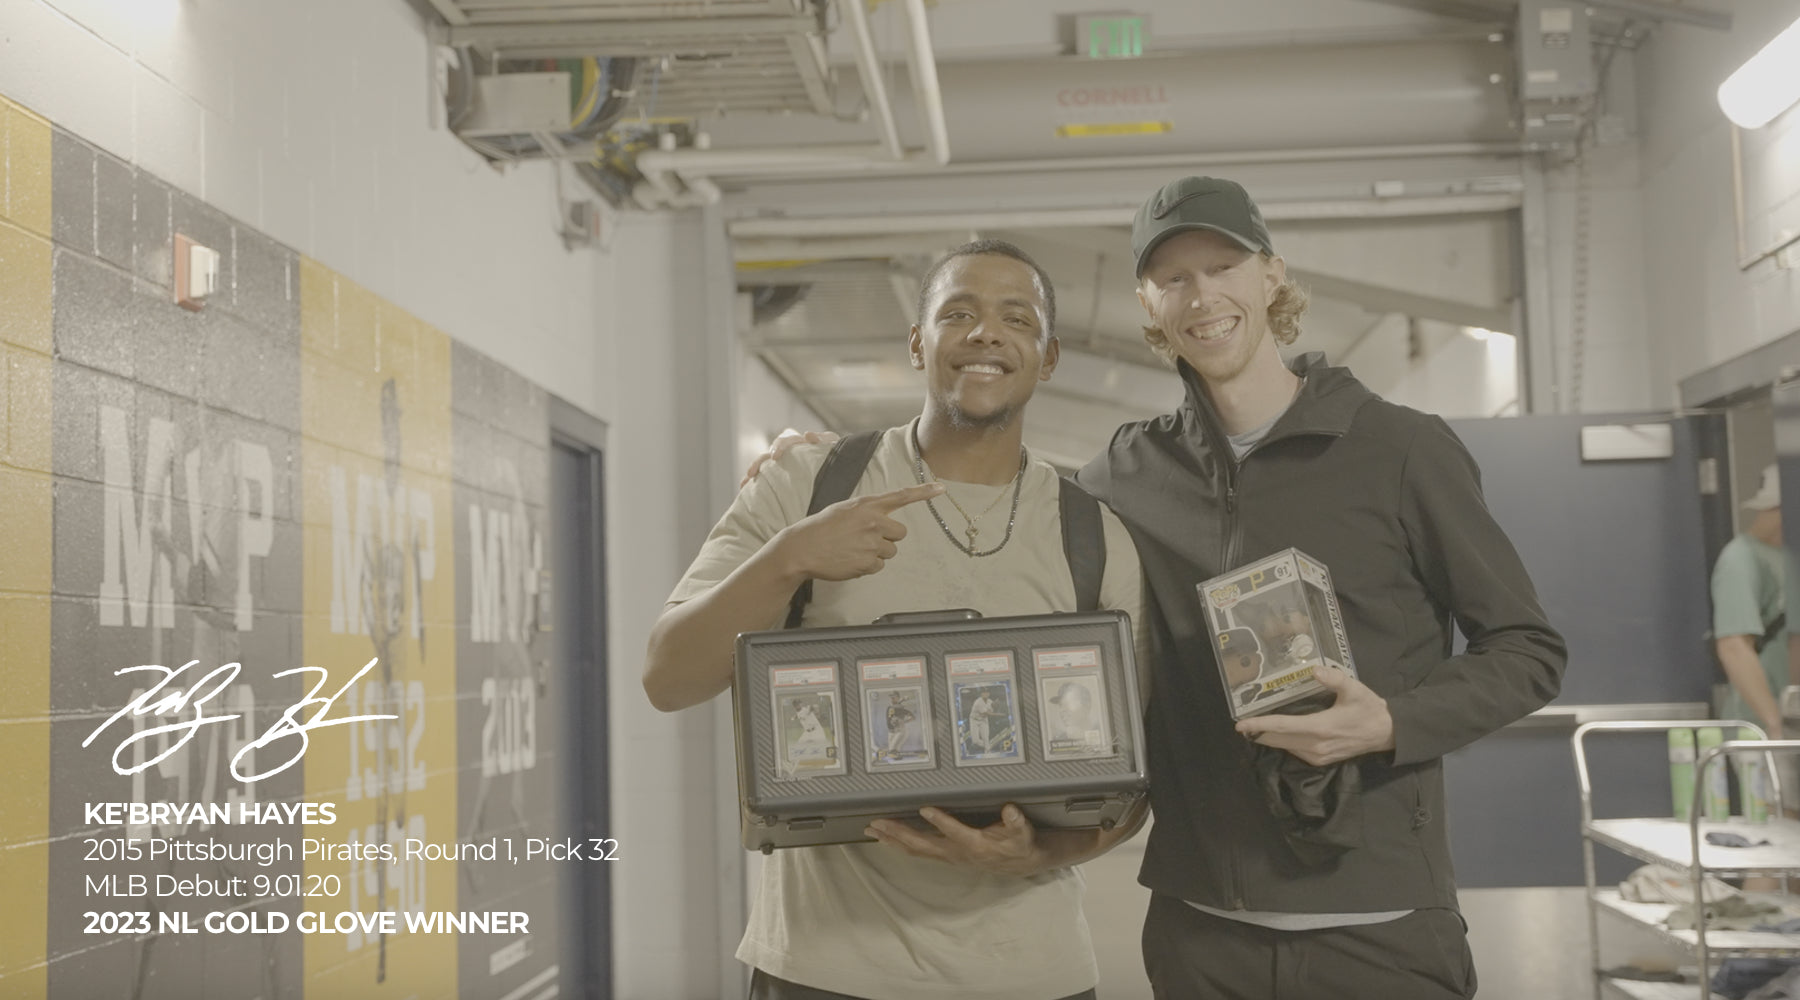 Vaulted founder Shane Kemp and former teammate and Pittsburgh Pirates Gold Glove Winner KeBryan Hayes with the Display Vault Card Edition